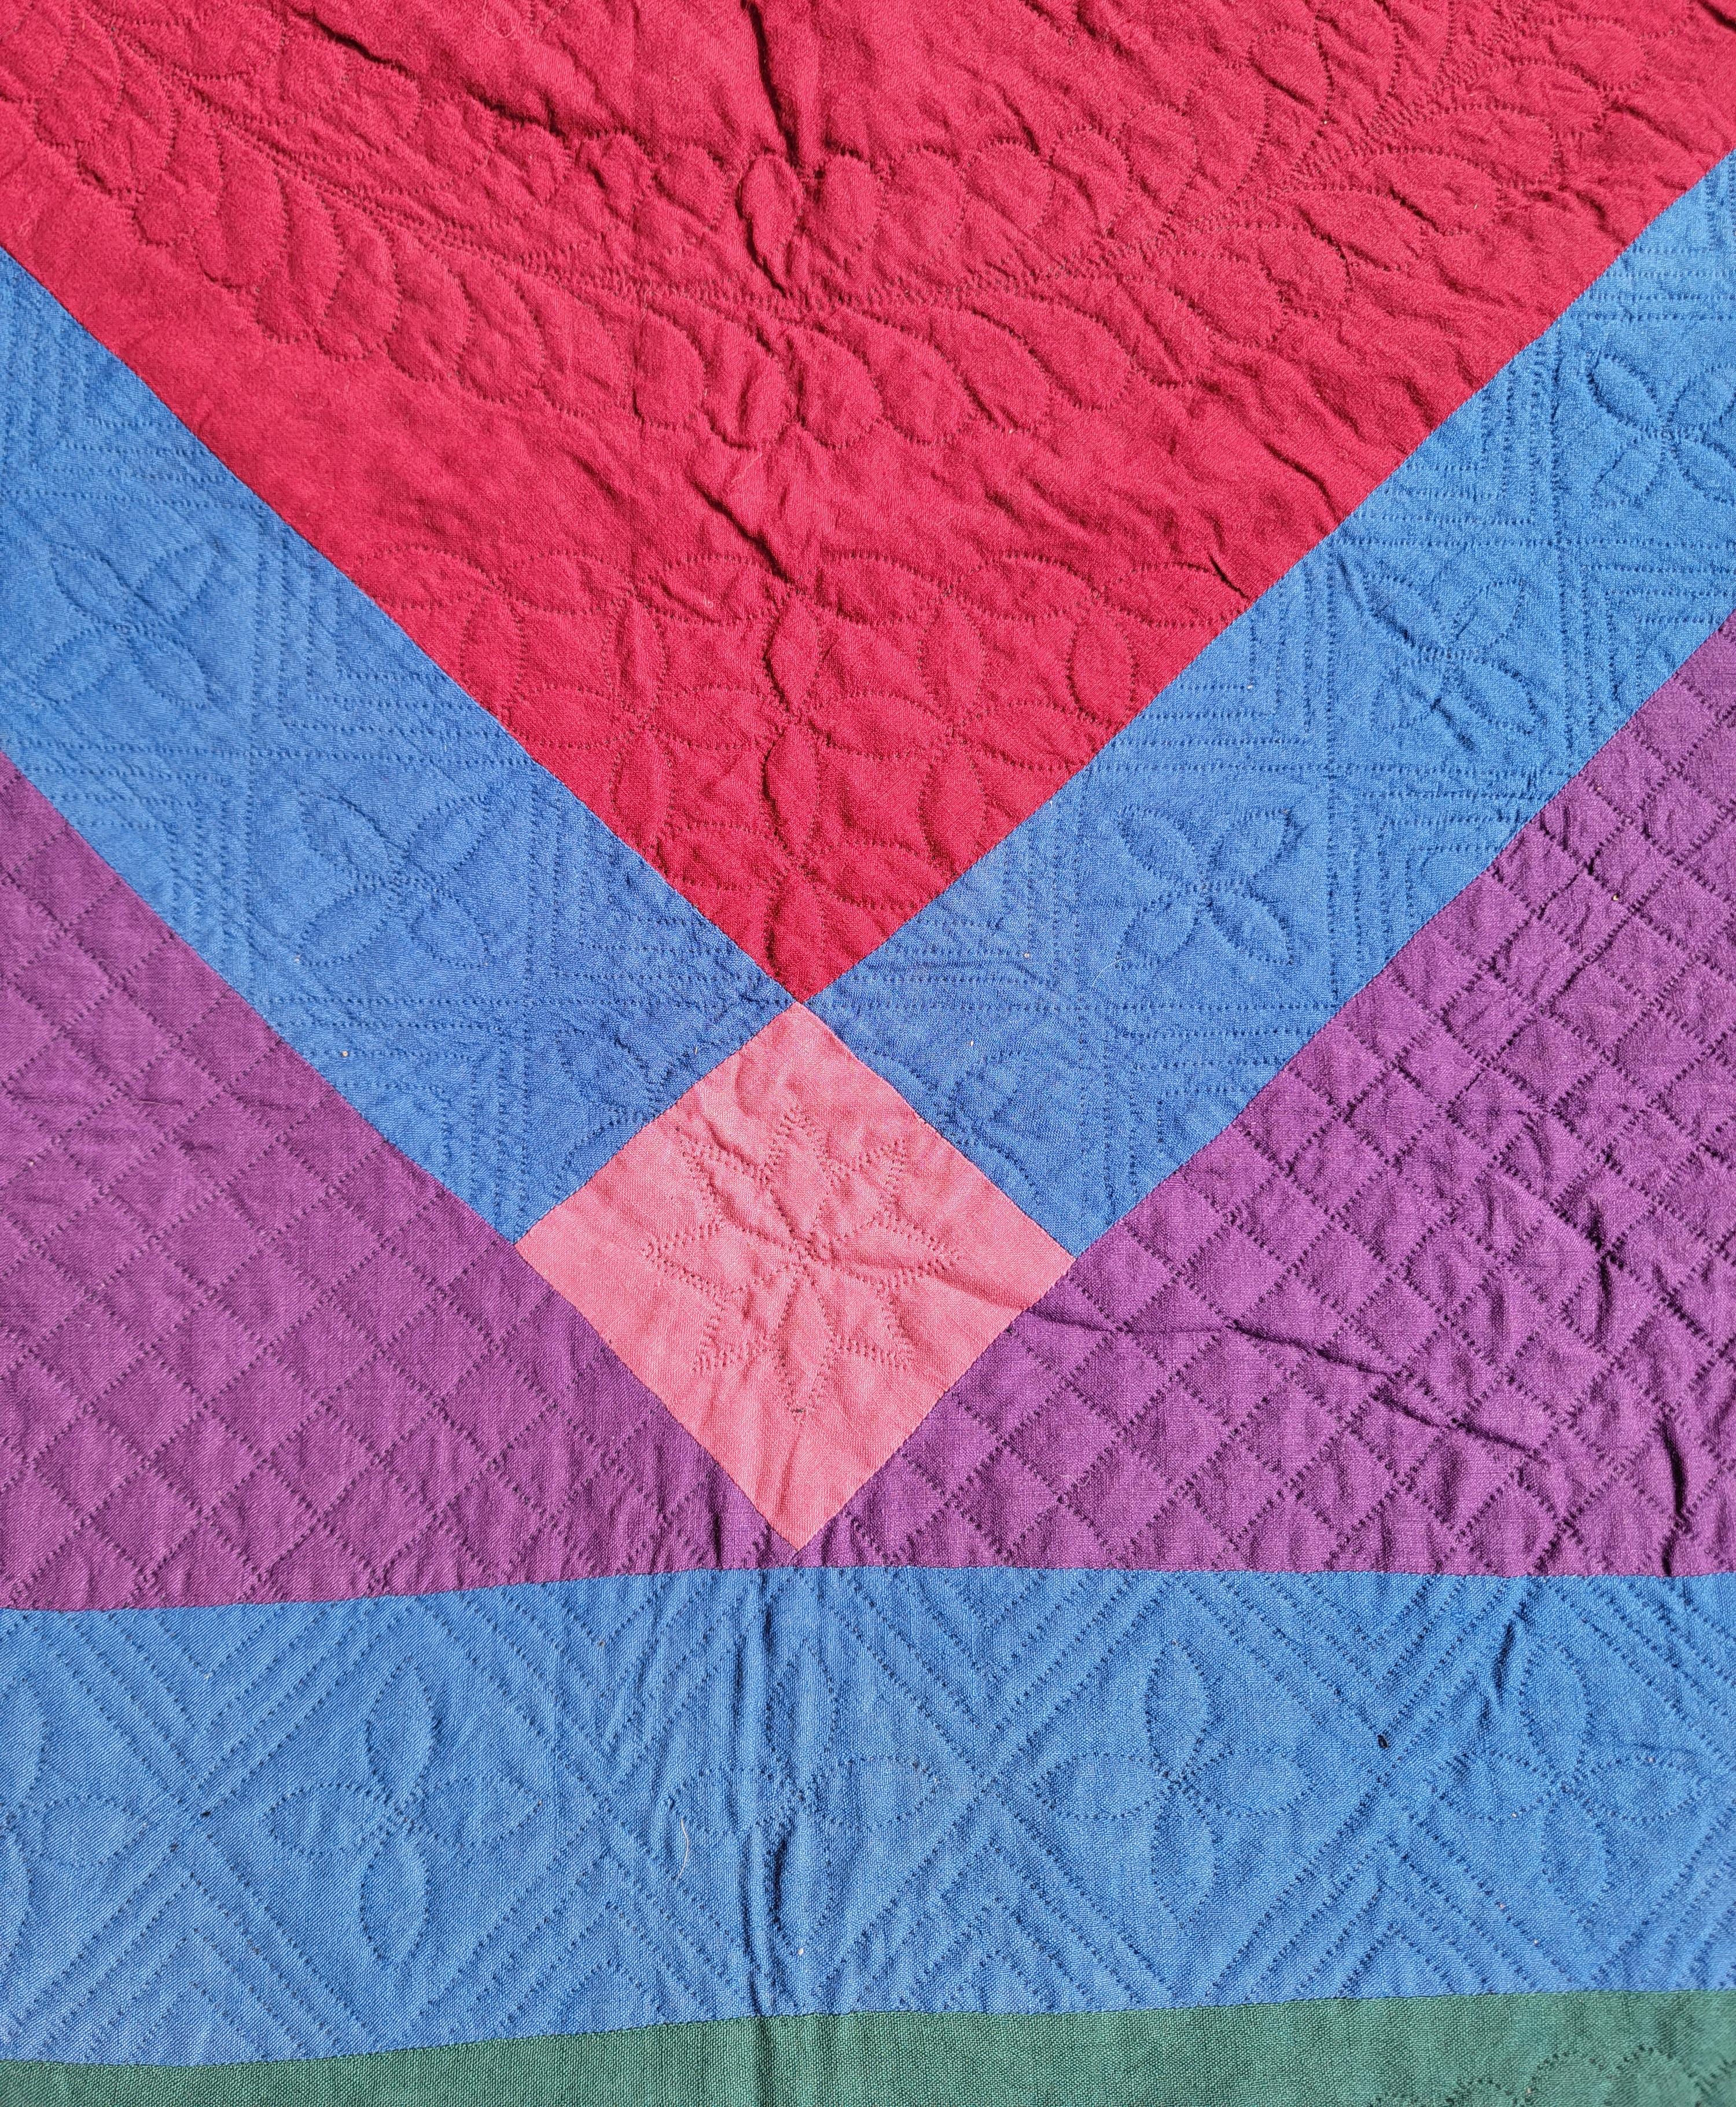 This Amish all wool diamond in a square quilt quilt from Pennsylvania is in fine condition. This fine quilted Pennsylvania Amish quilt is so fantastic with the center red diamond has stars quilting.A similar Amish diamond is documented in 